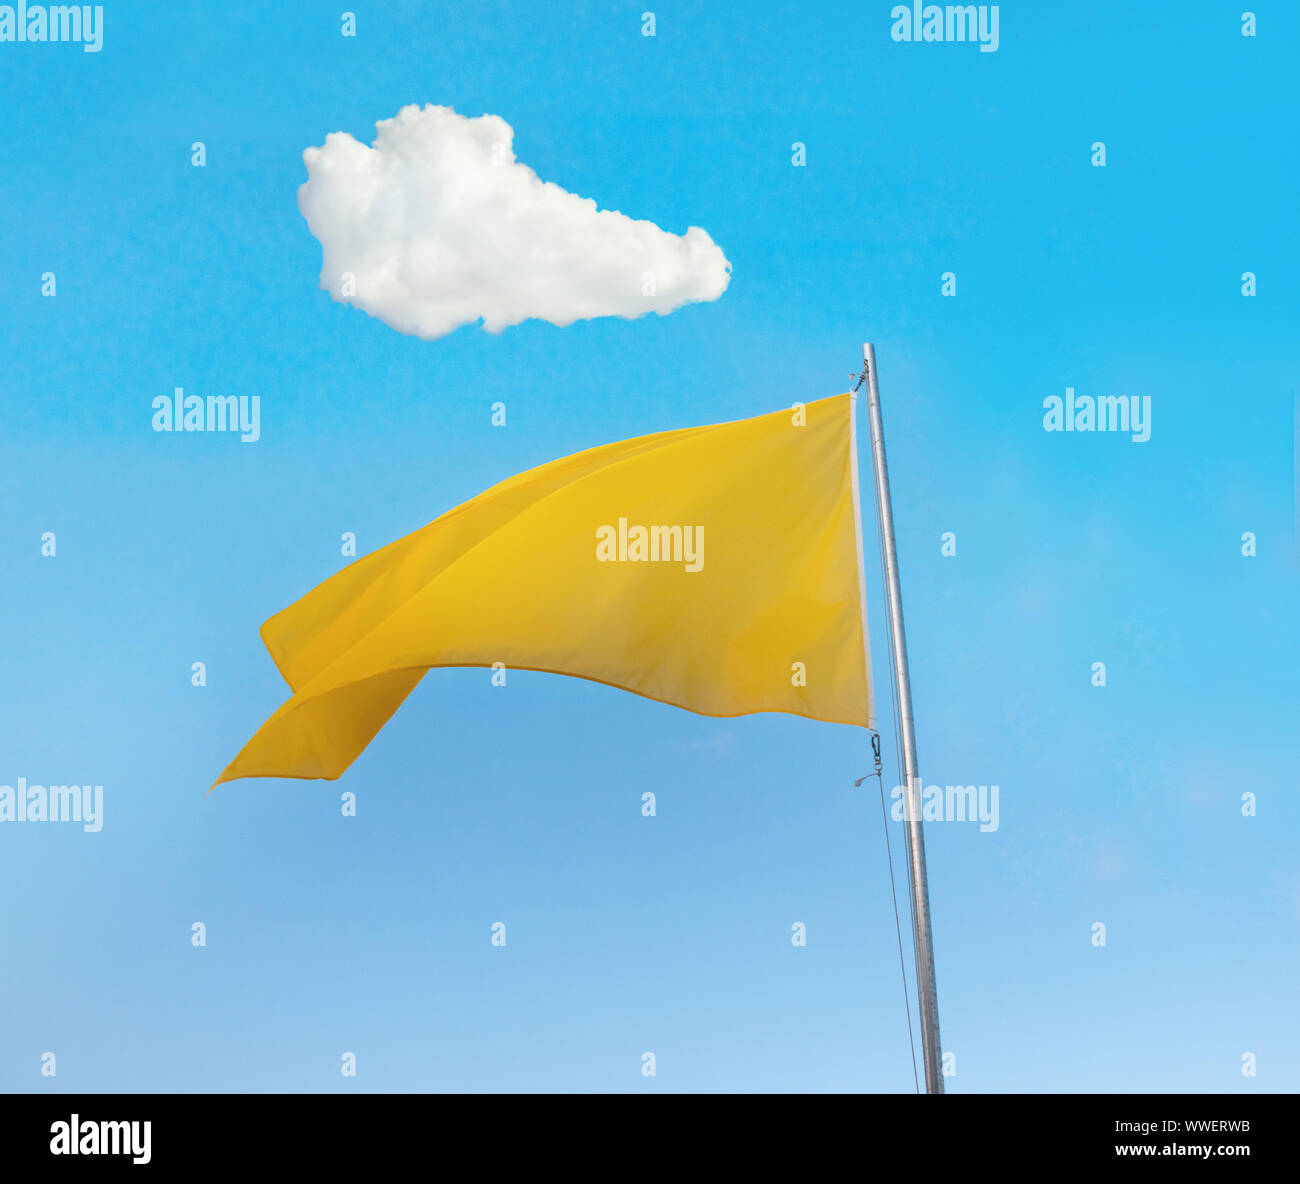 Yellow flag over blue sky with a white cloud above Stock Photo